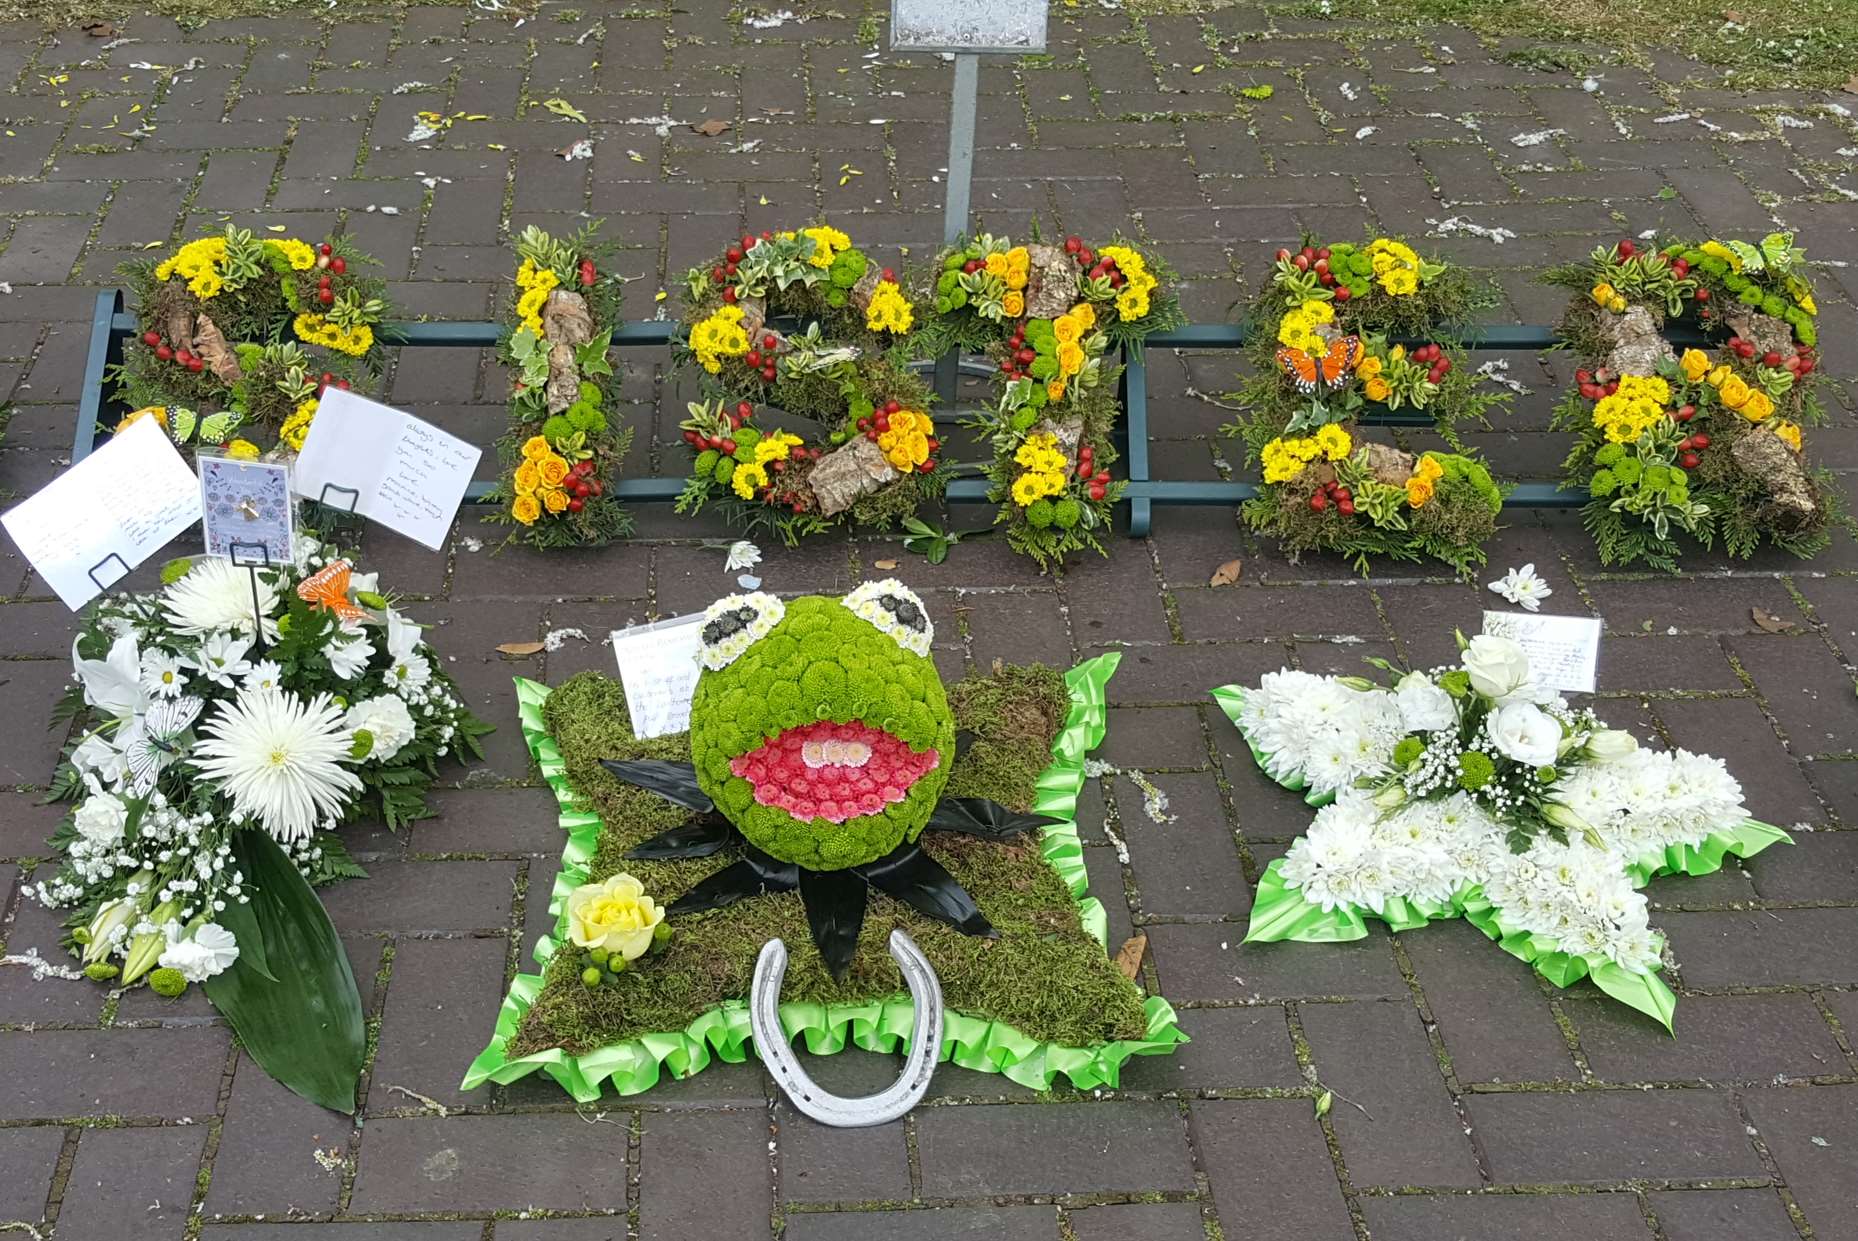 Floral tributes reading sister and an homage to Kermit the Frog were displayed at Natasha Sadler's funeral